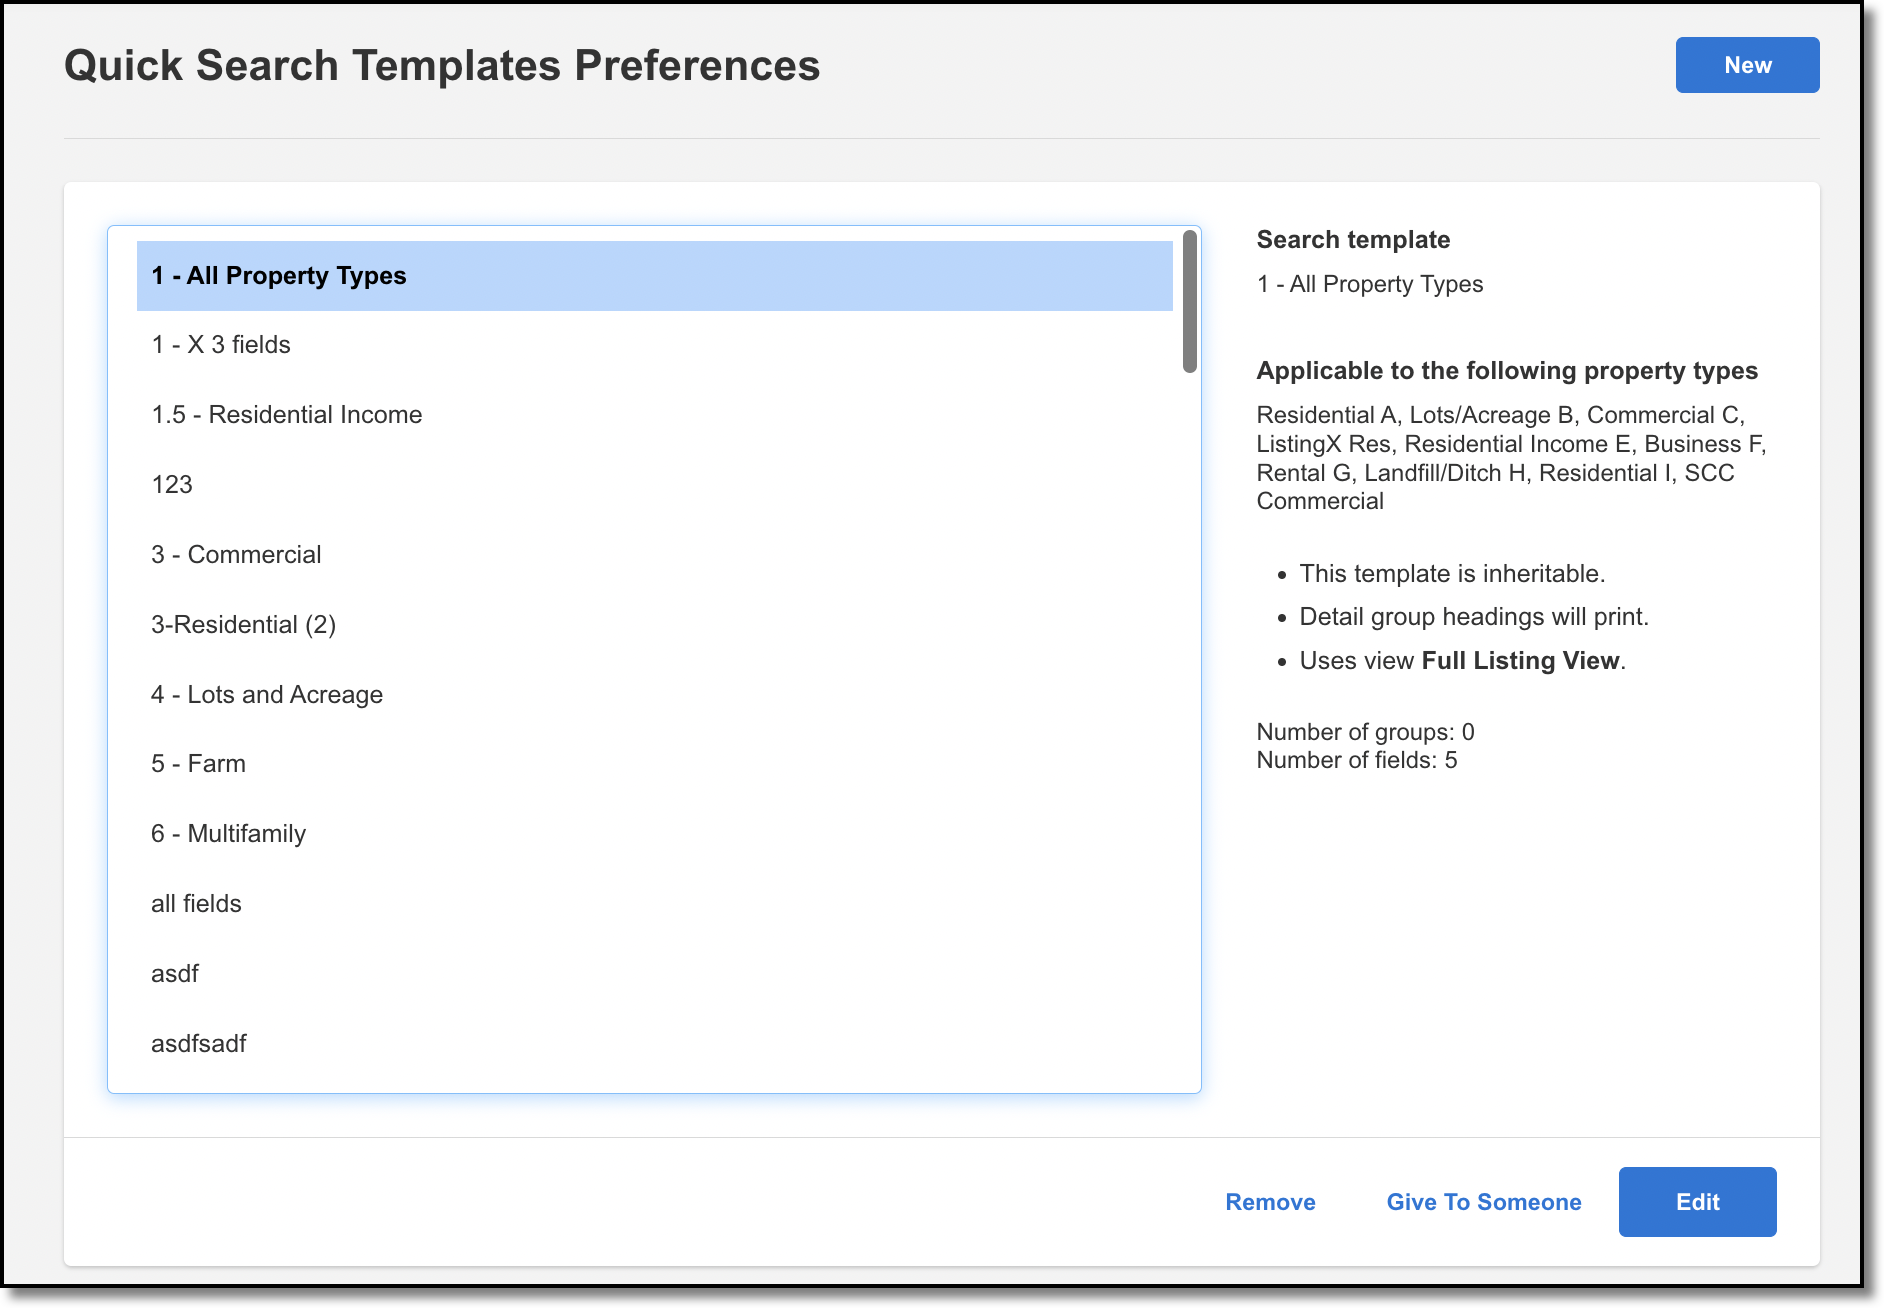 quick-search-templates-preferences-demo.png